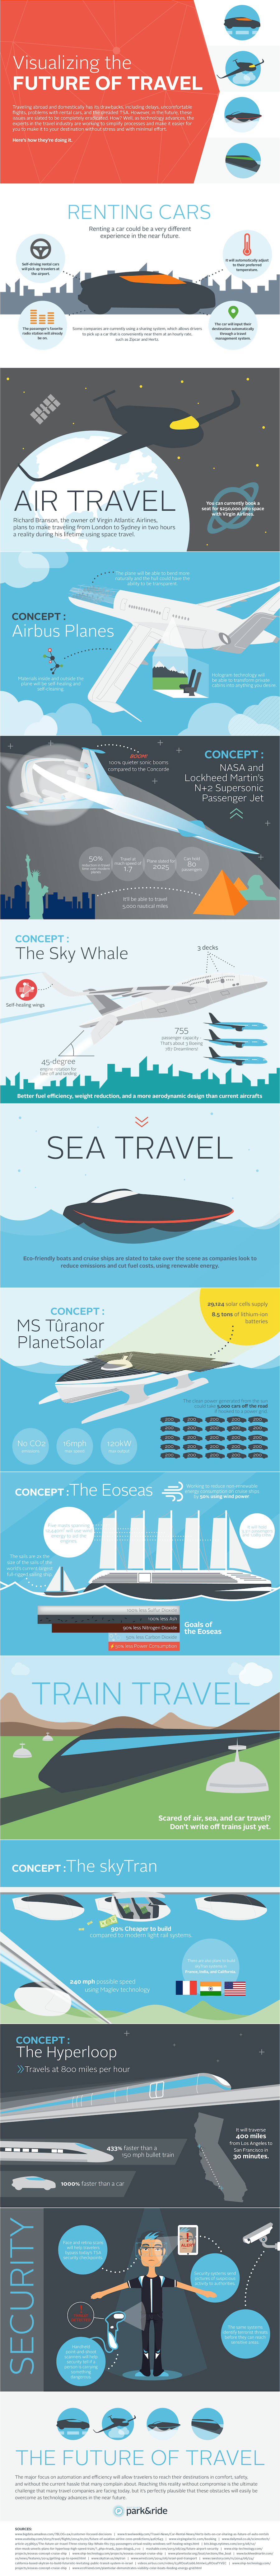 the future of travel infographic